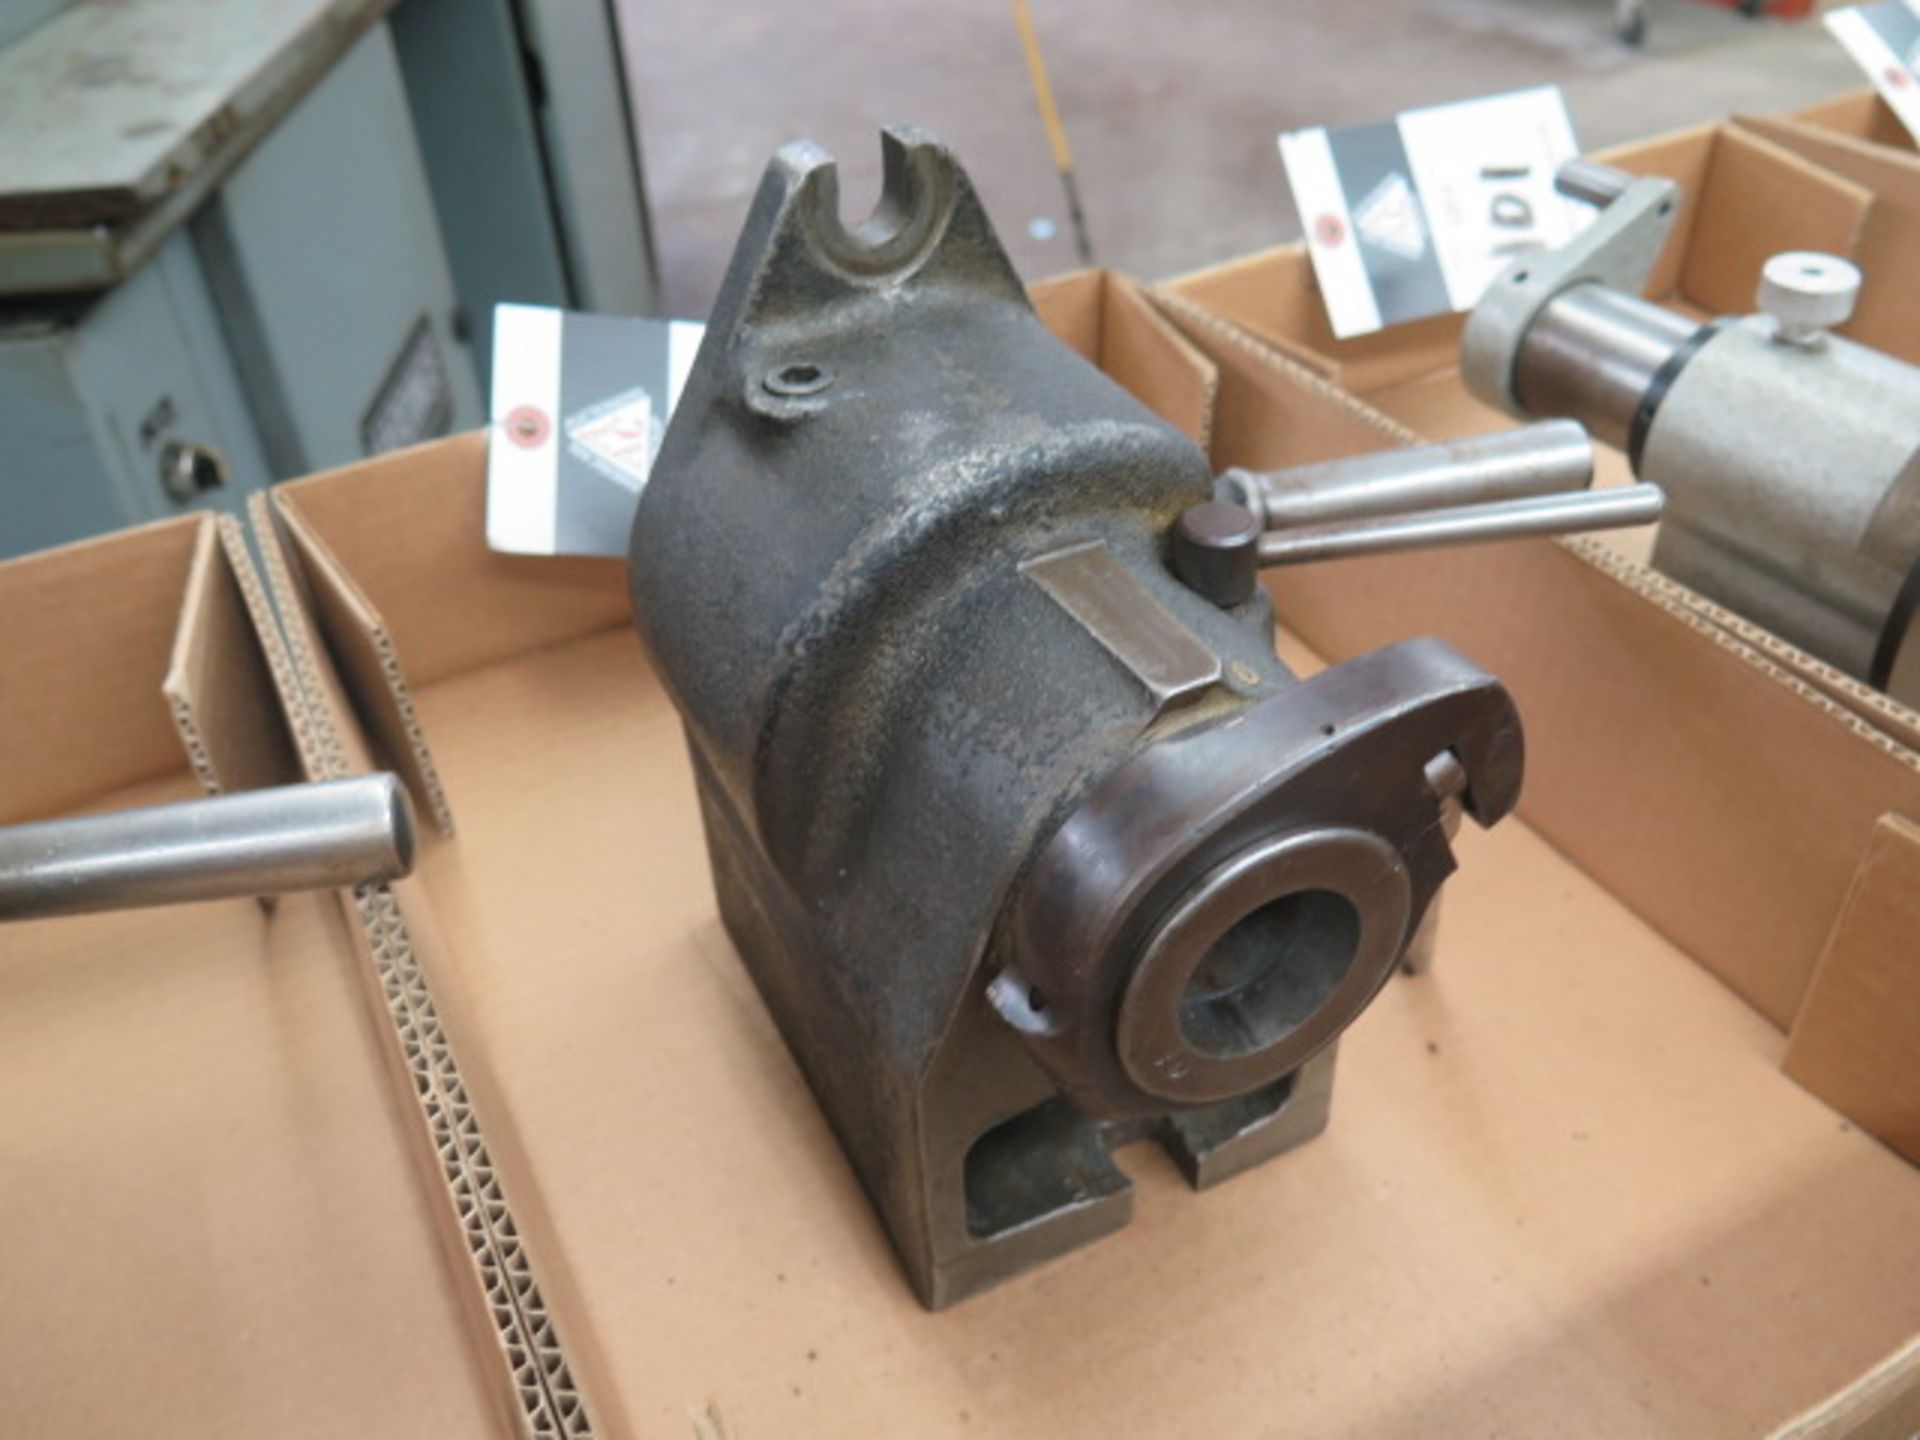 Hardinge 5C Indexing Head (SOLD AS-IS - NO WARRANTY) - Image 2 of 3